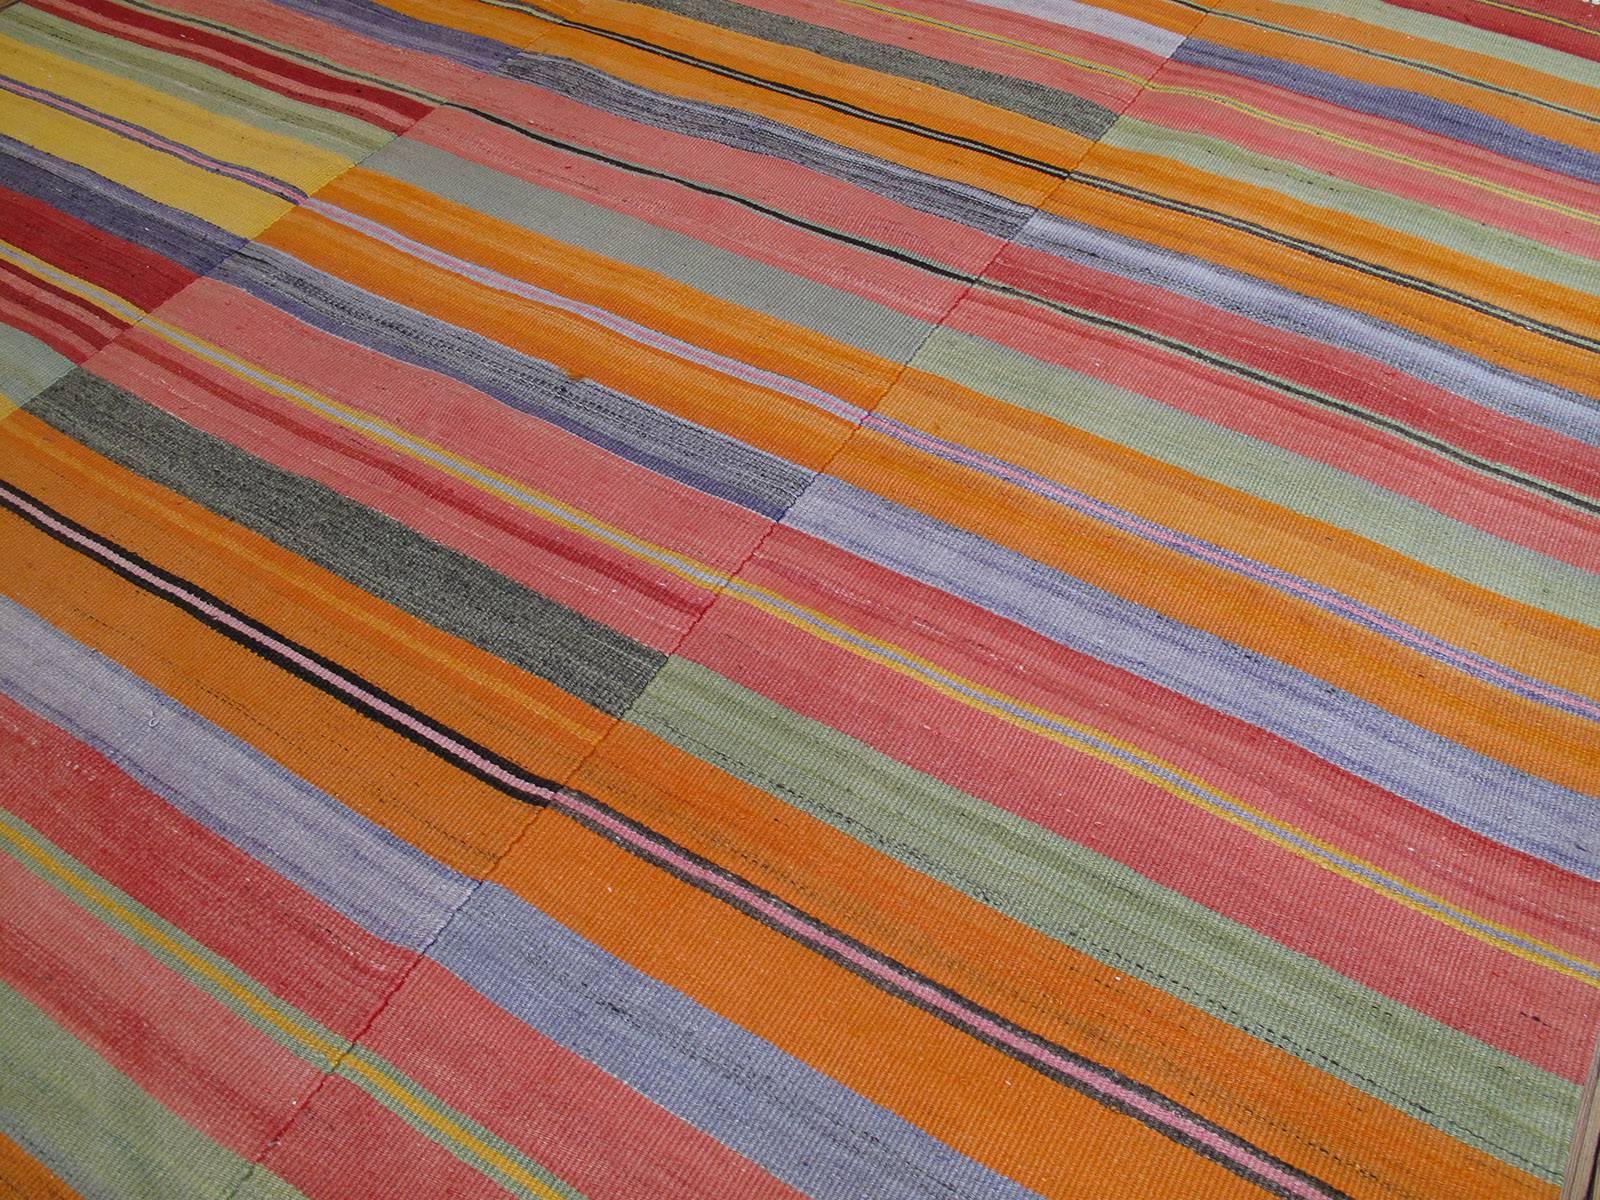 Hand-Woven Kilim with Multi-Colored Bands